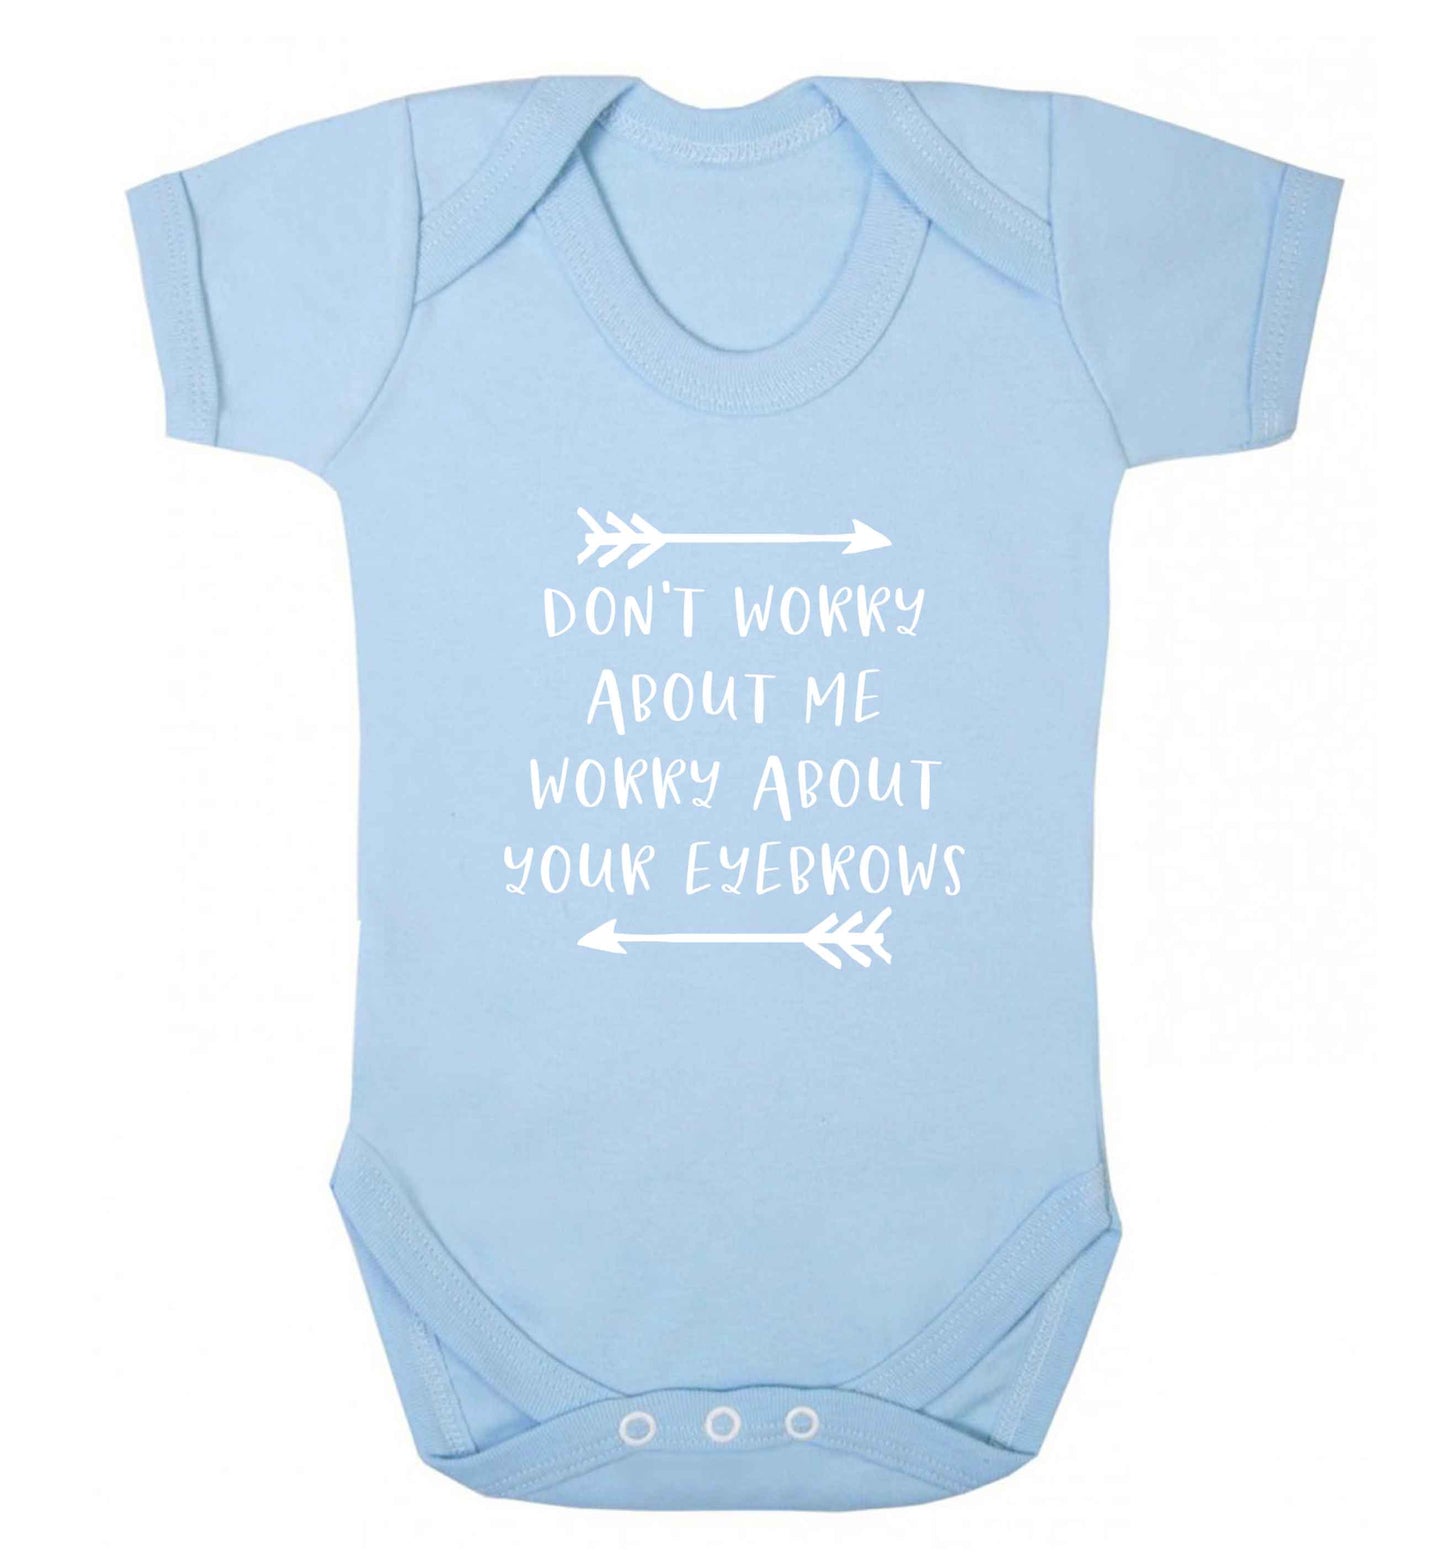 Don't worry about me worry about your eyebrows baby vest pale blue 18-24 months